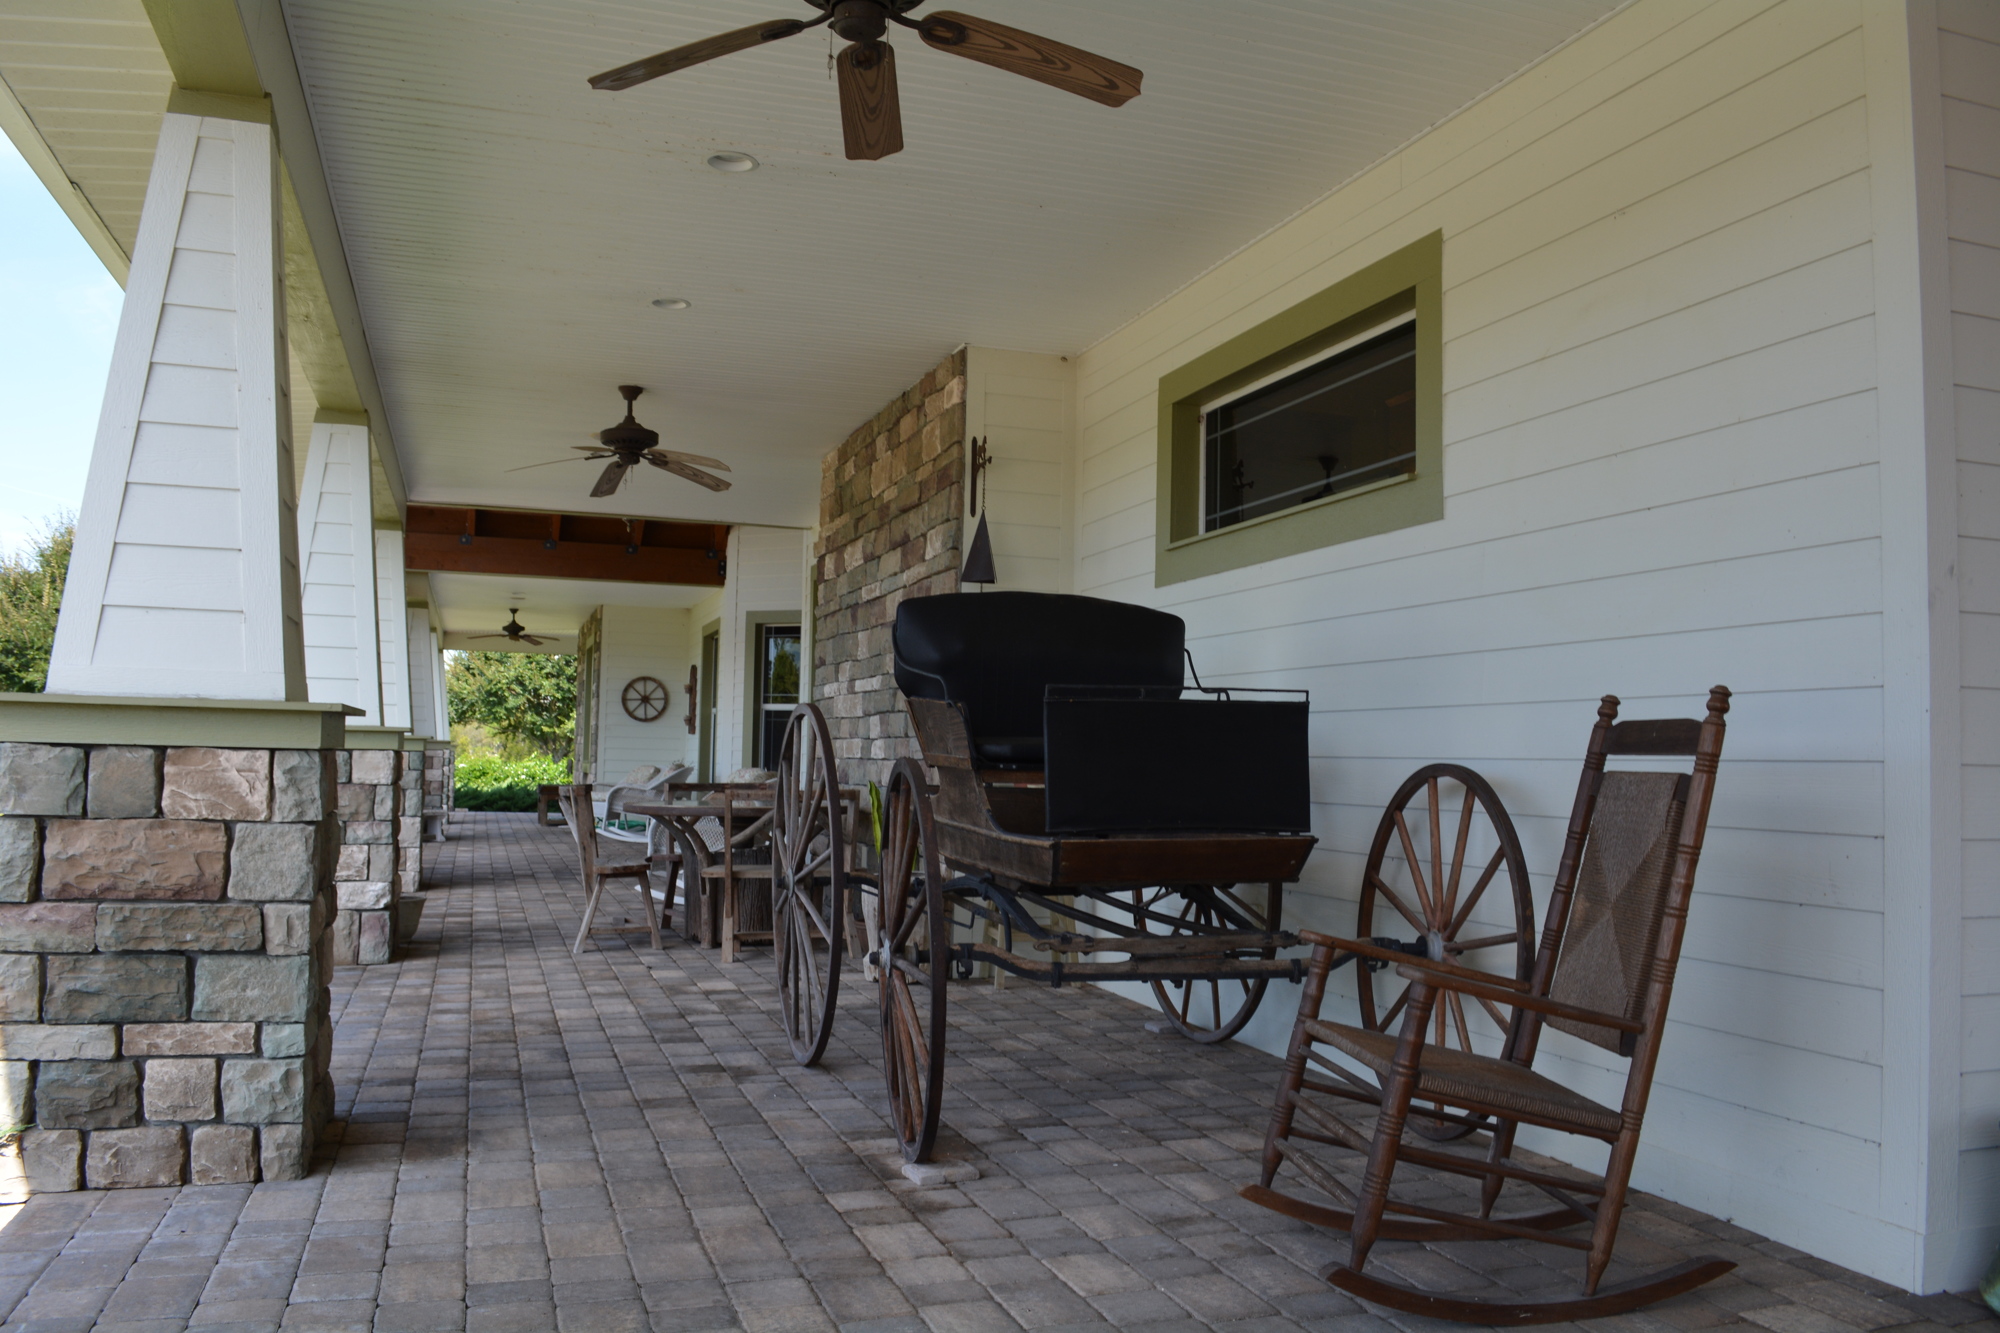 The main home includes a pavered wrap-around porch, currently decorated with rocking chairs, an old horse buggy and other decor.